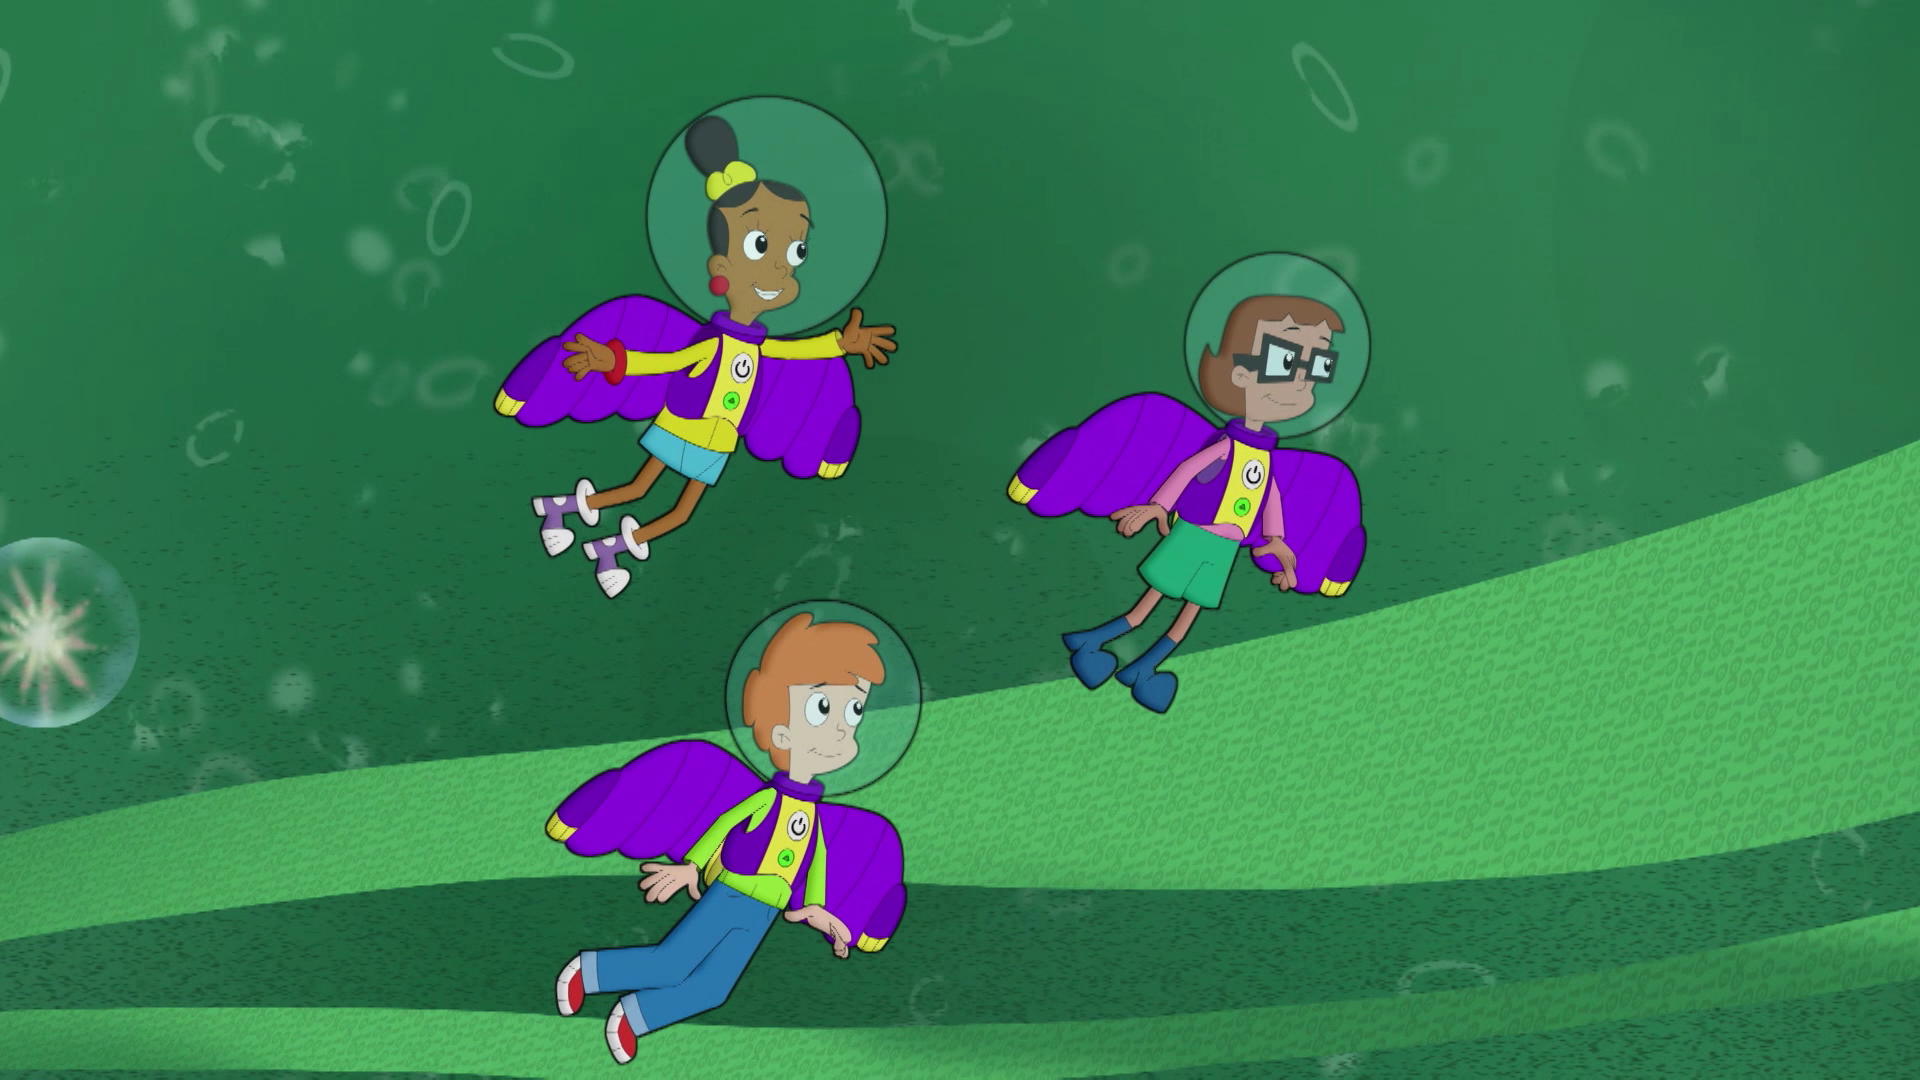 Cyberchase - PBS Series - Where To Watch